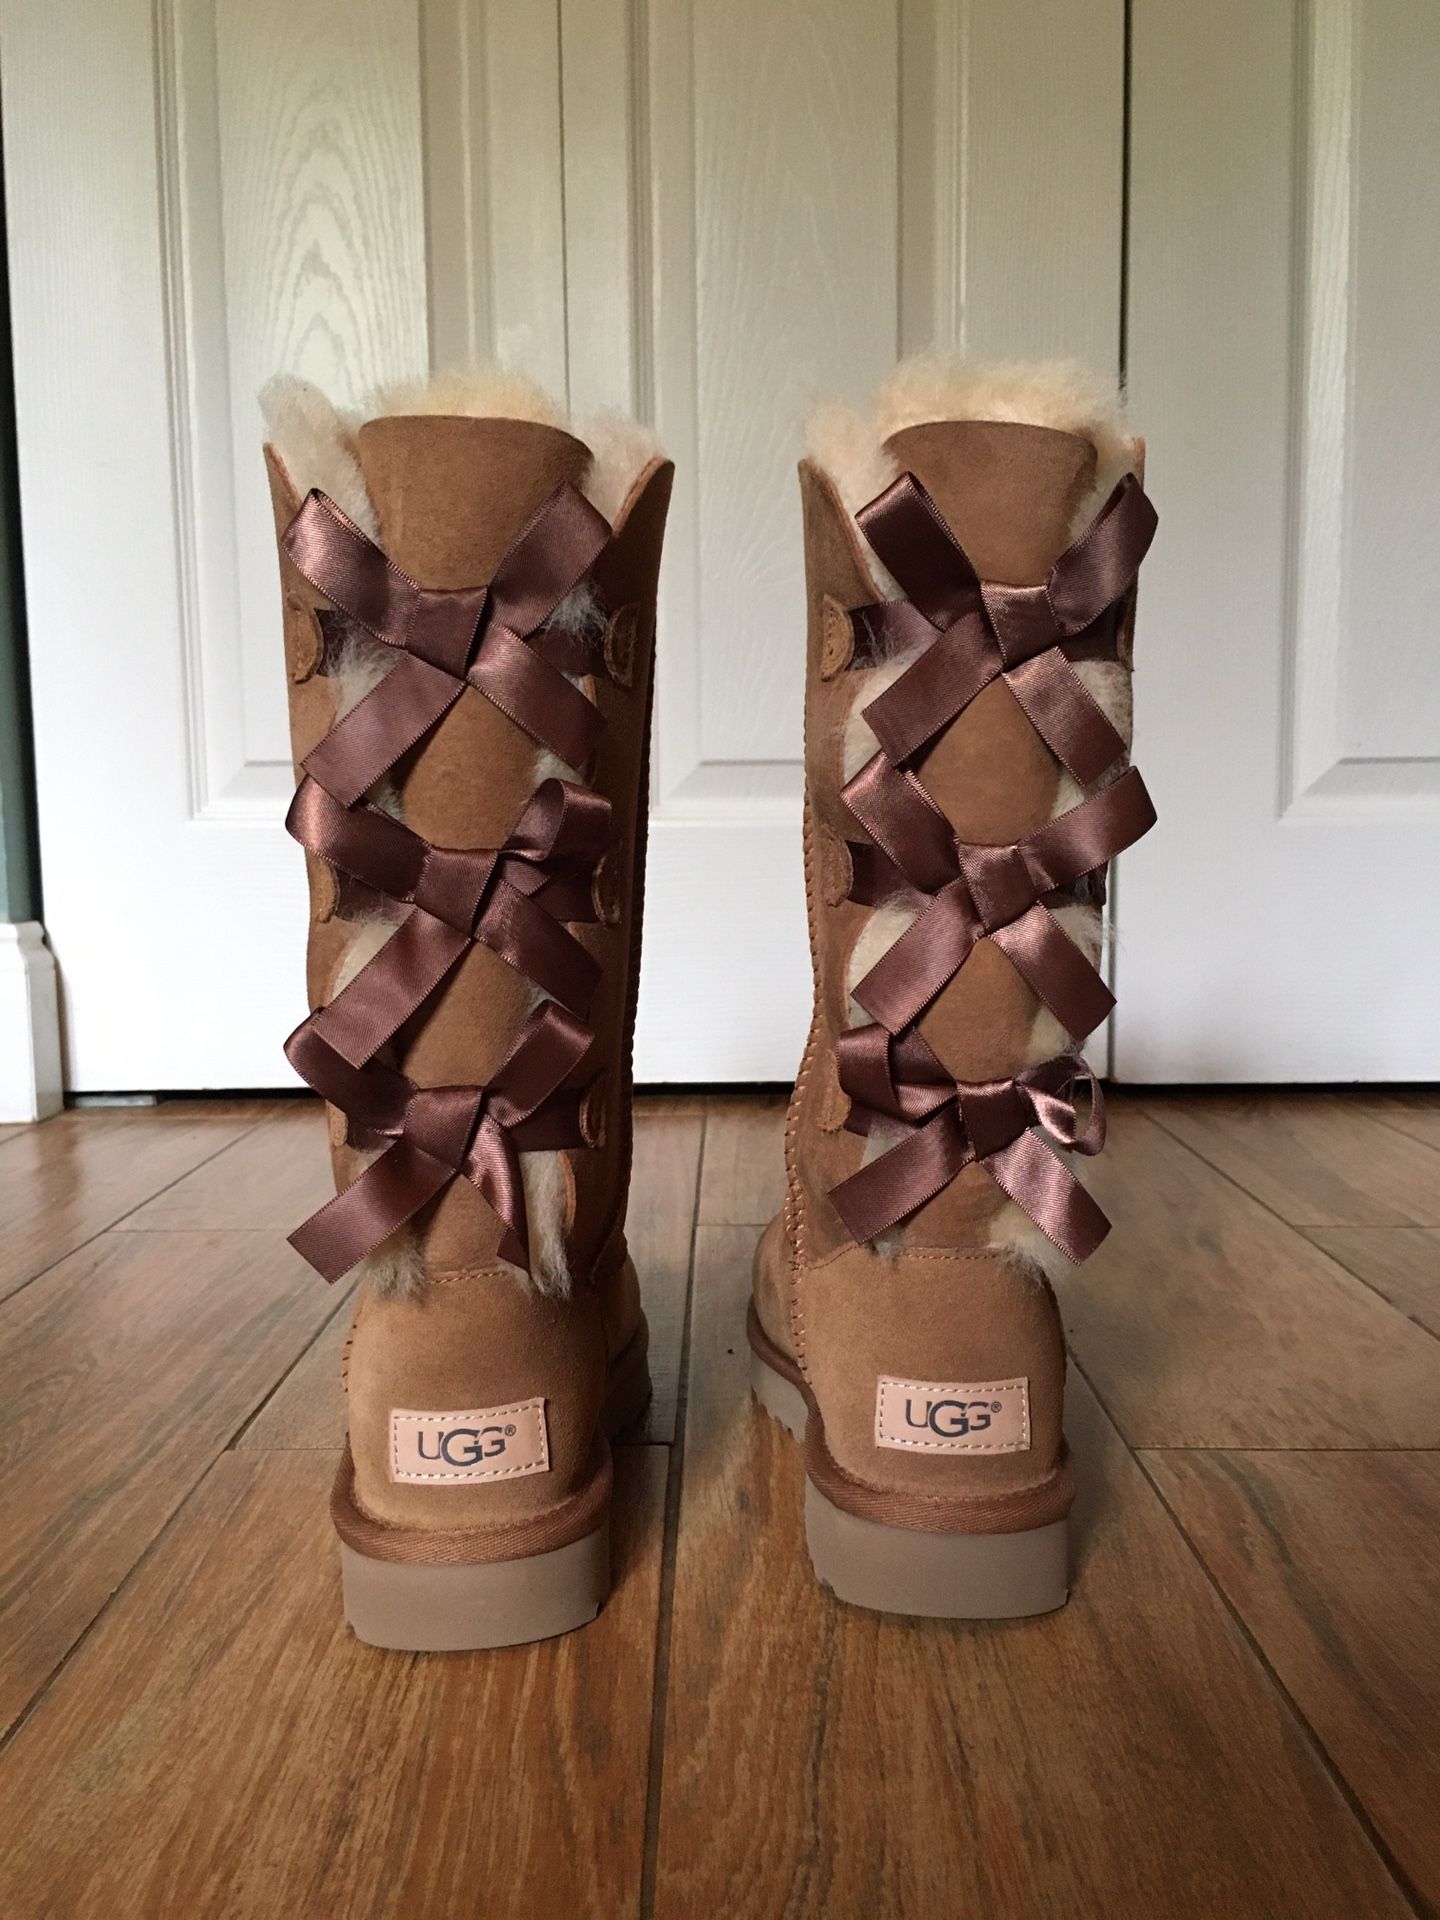 Tall Triplet Bow (UGG)